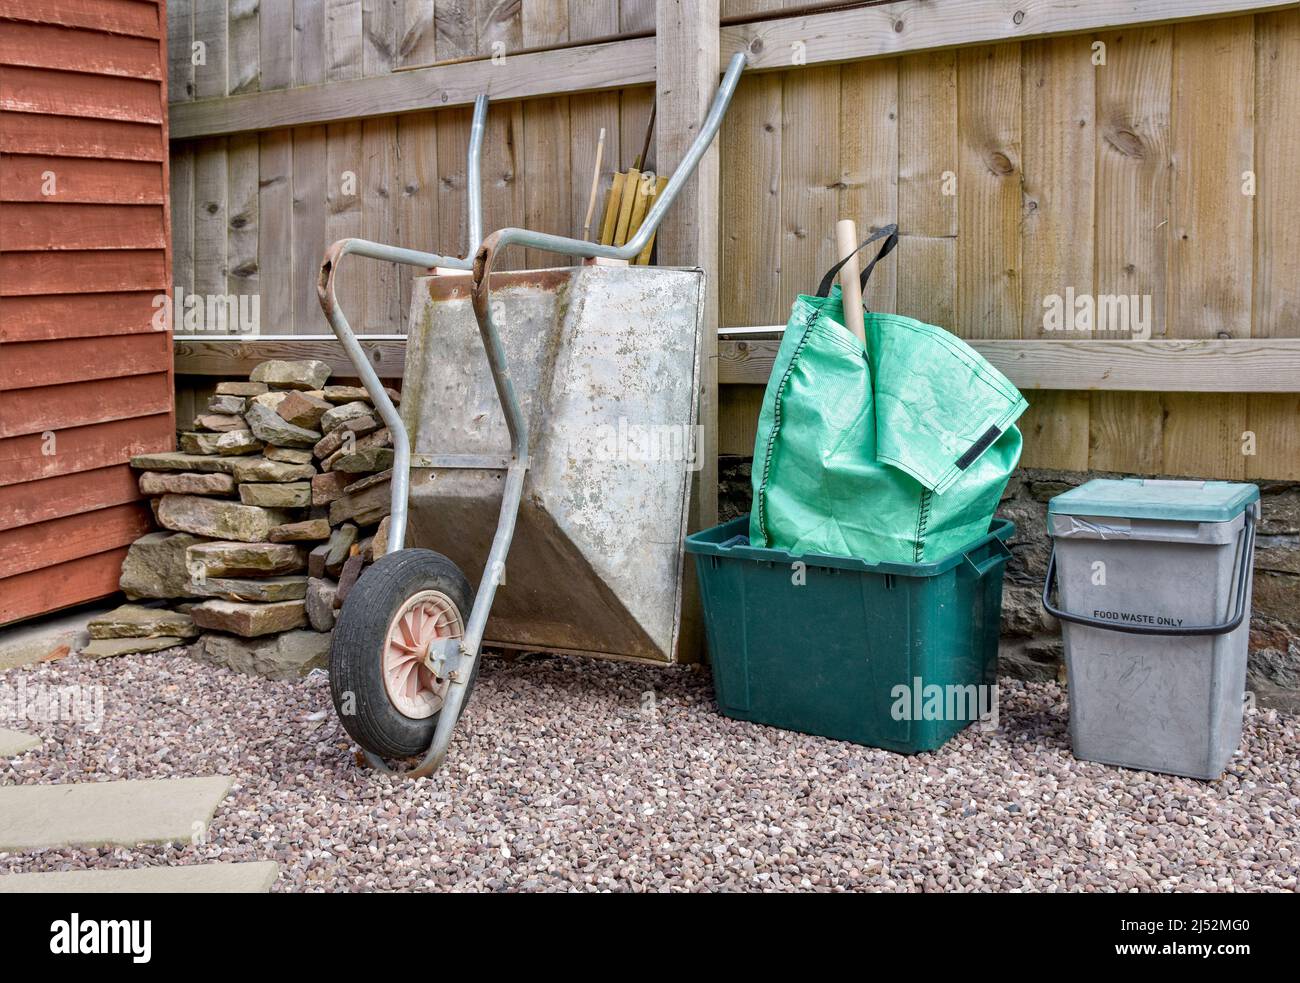 Garden corner with gardening items including wheelbarrow, large spade, large fork, Stone pile, gloves and wellies against wooden fence and stone wall Stock Photo